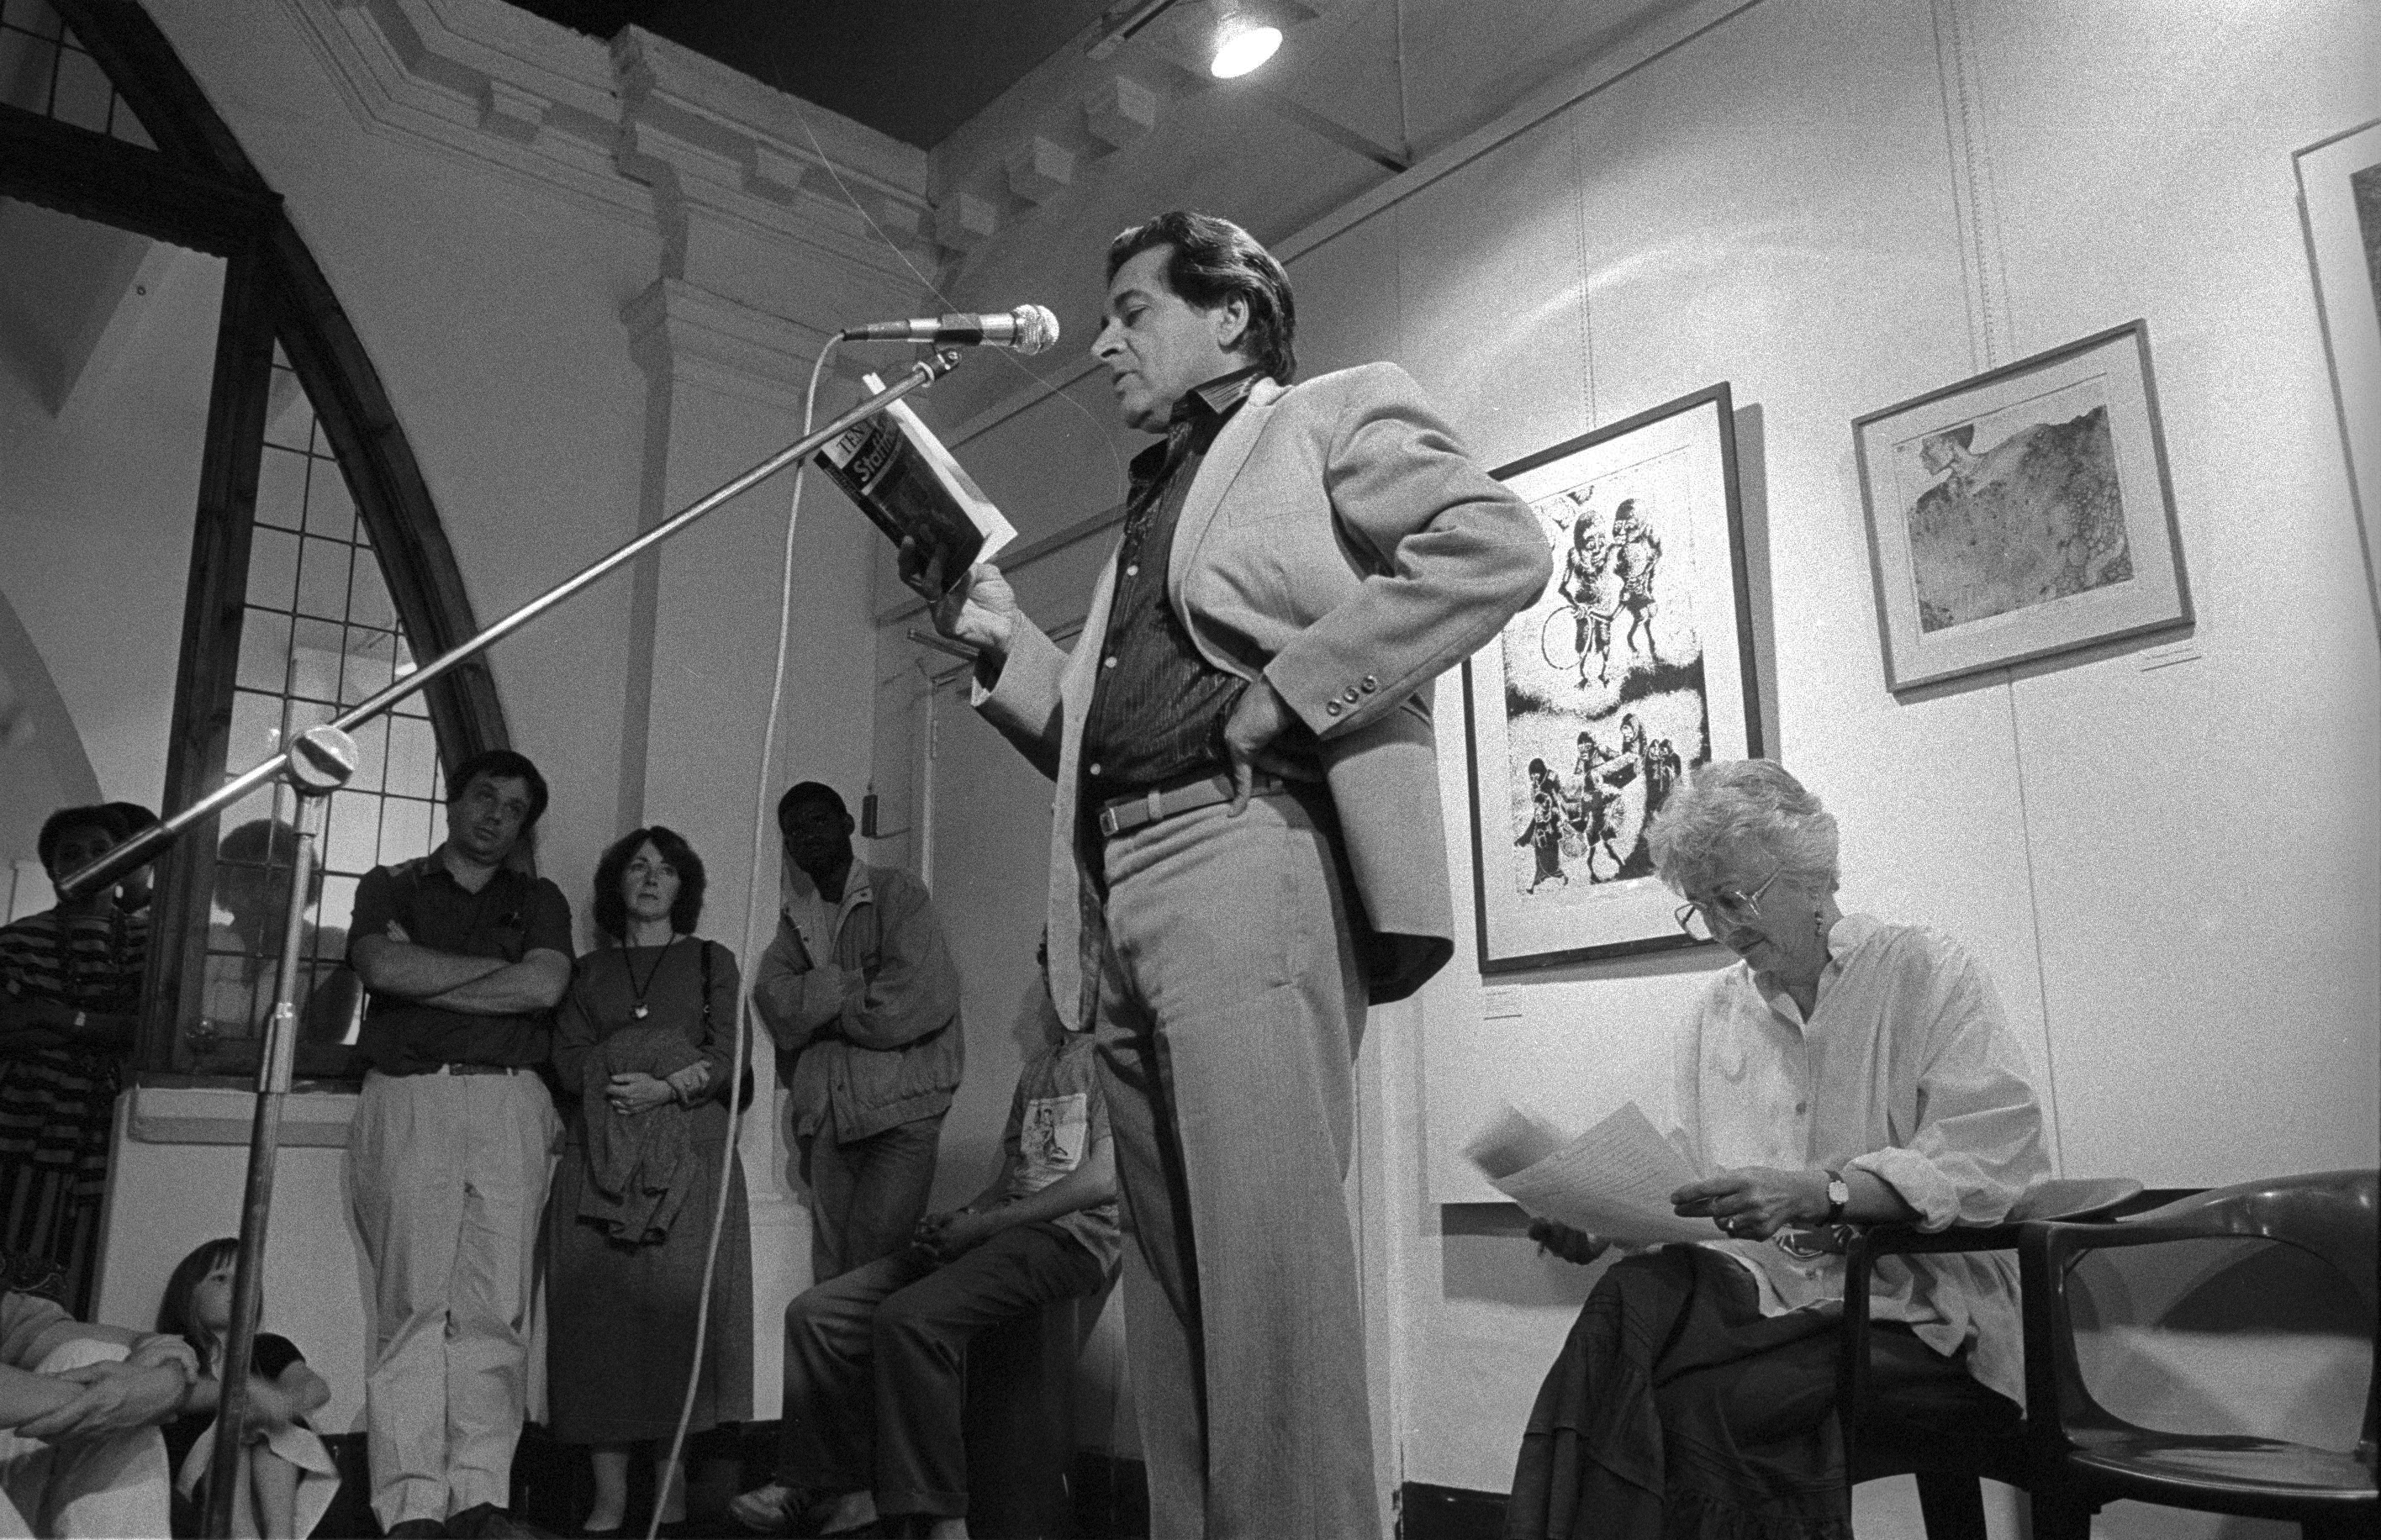 Writer Ahmed Essop speaking at Market Photo Gallery - 10 years of Staffrider exhibition and book launch 1988. © Omar Badsha